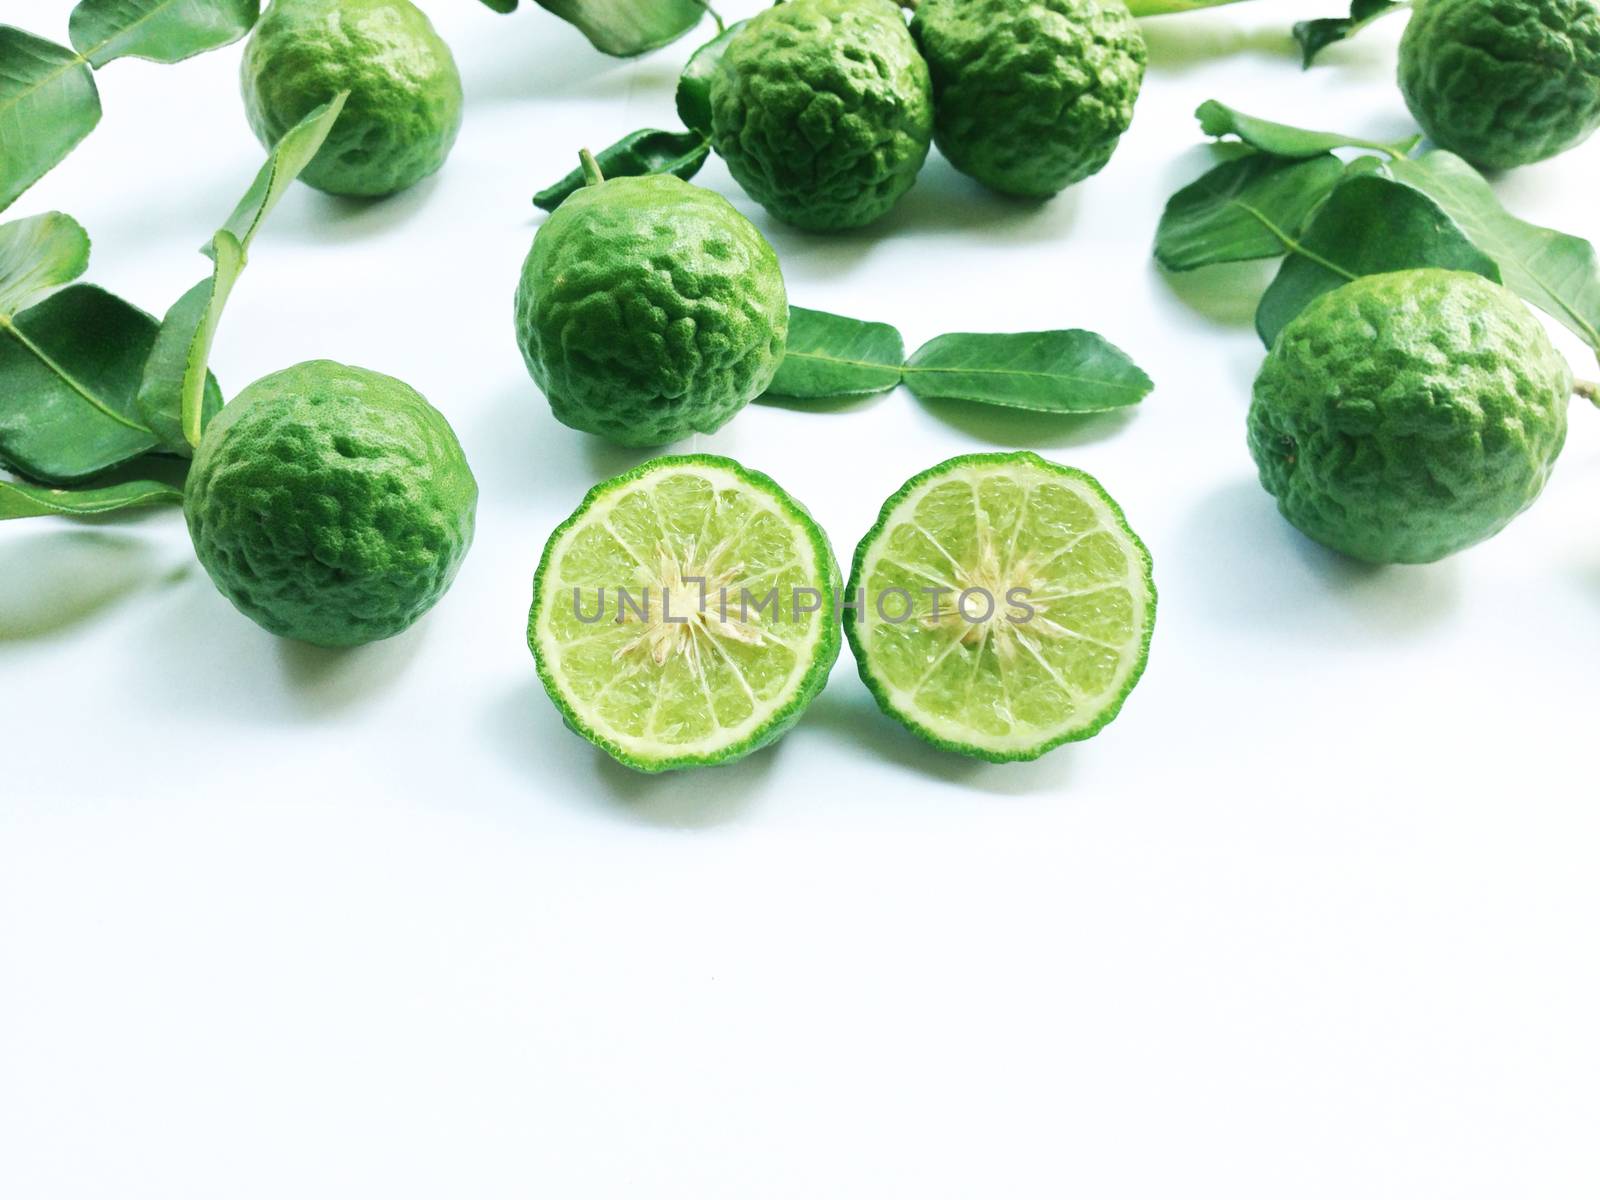 Kaffir Lime and slices by Bowonpat